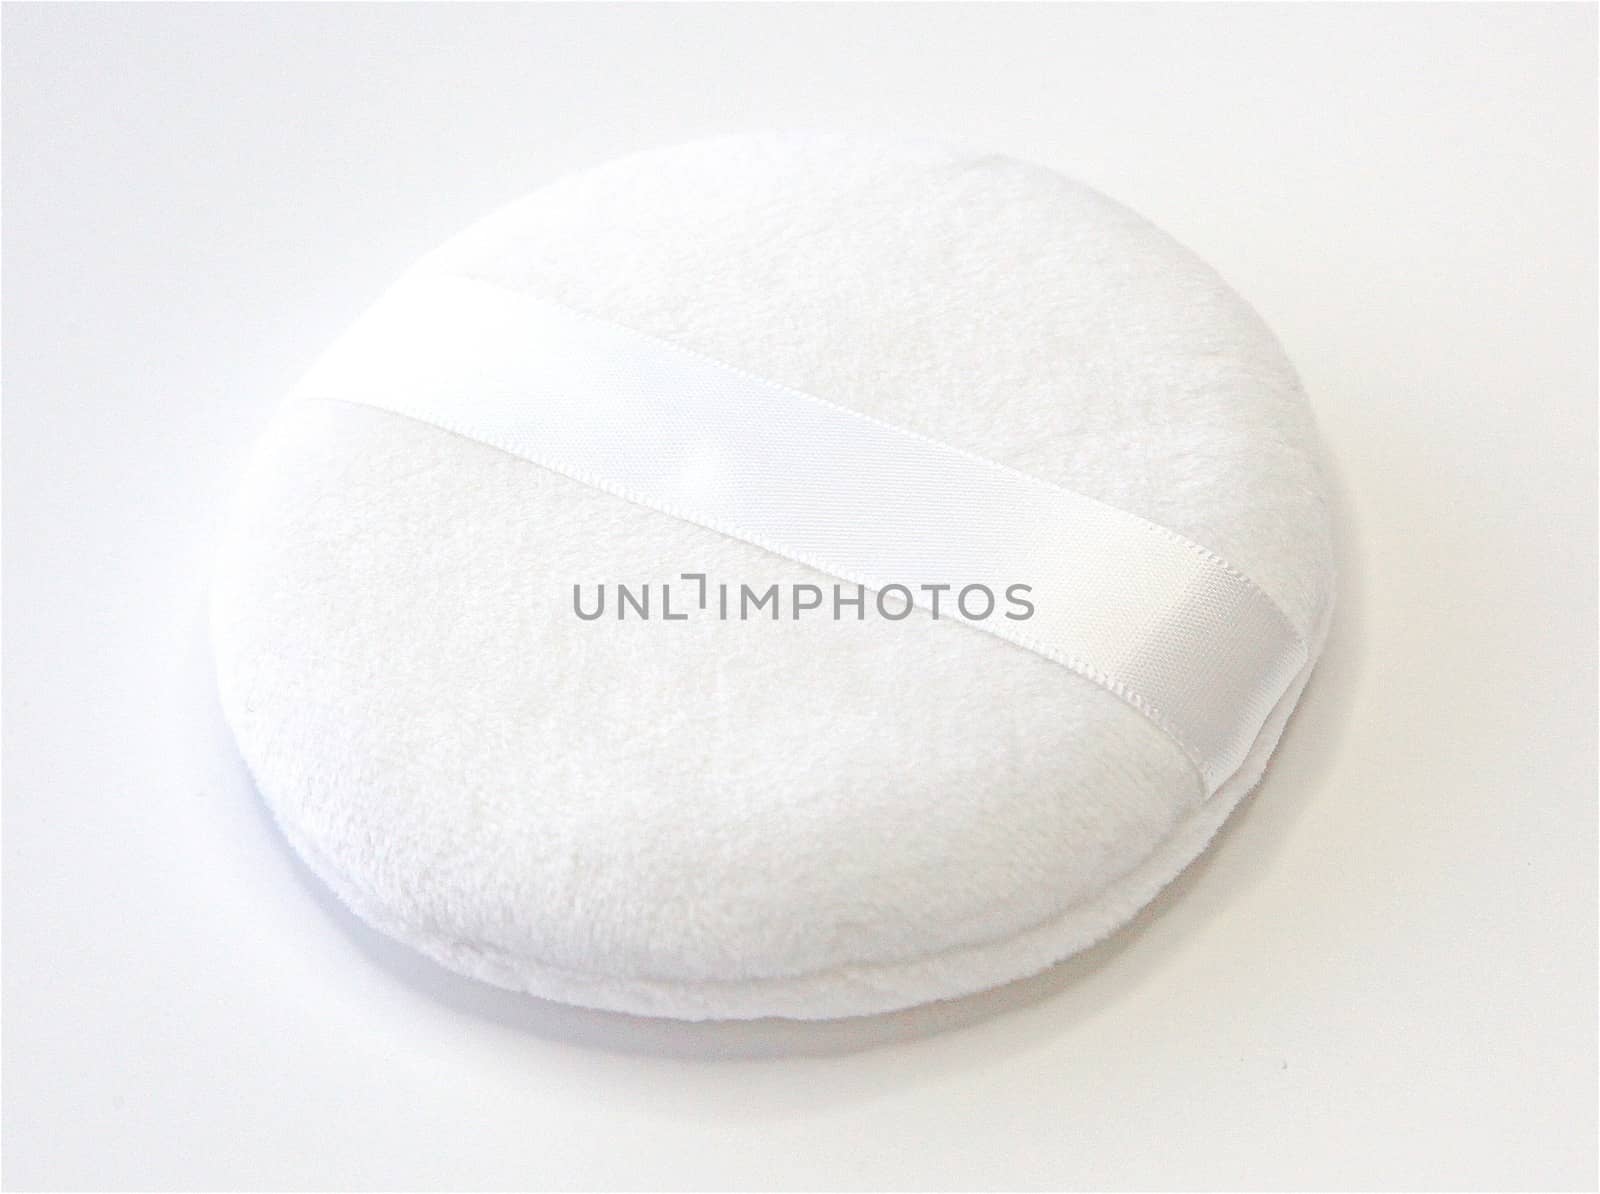 hygiene disposable makeup powder puff sponge applicator beauty by CatherineSophie